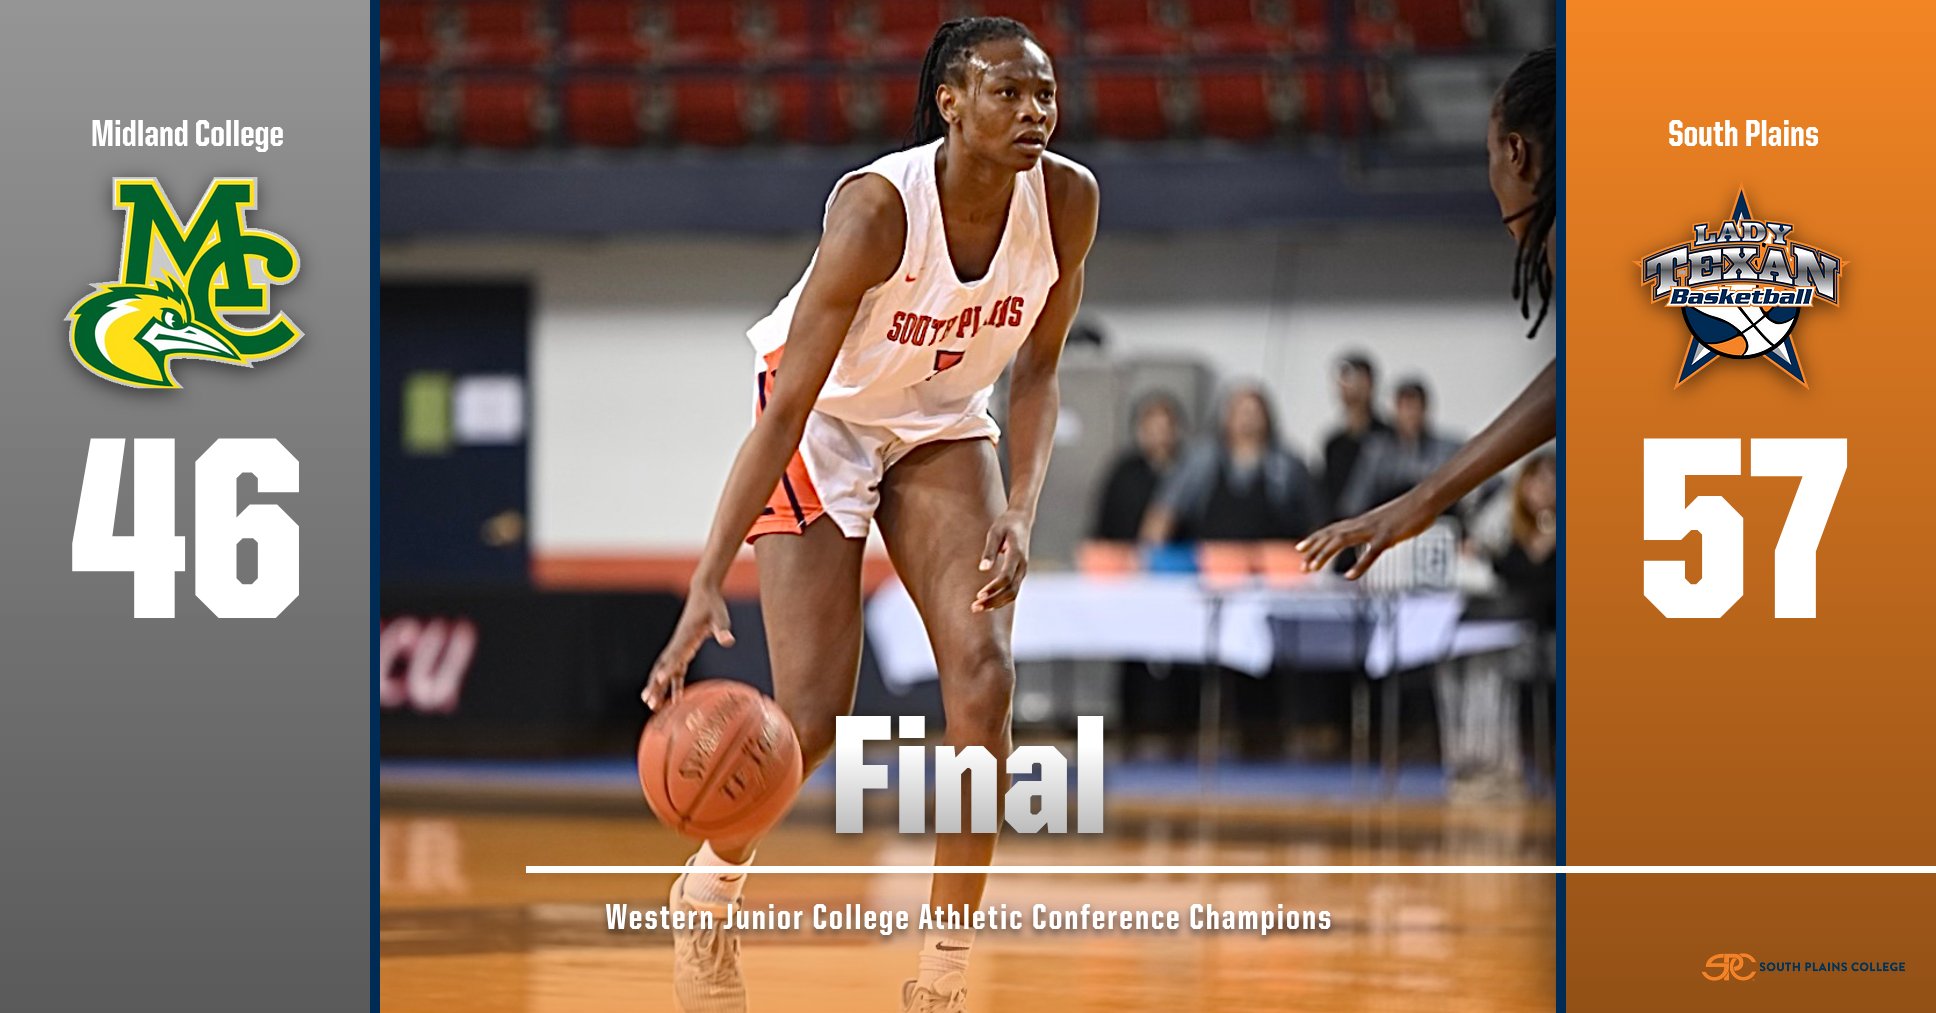 Lady Texans topple Midland 57-46 to secure Western Junior College Athletic Conference title